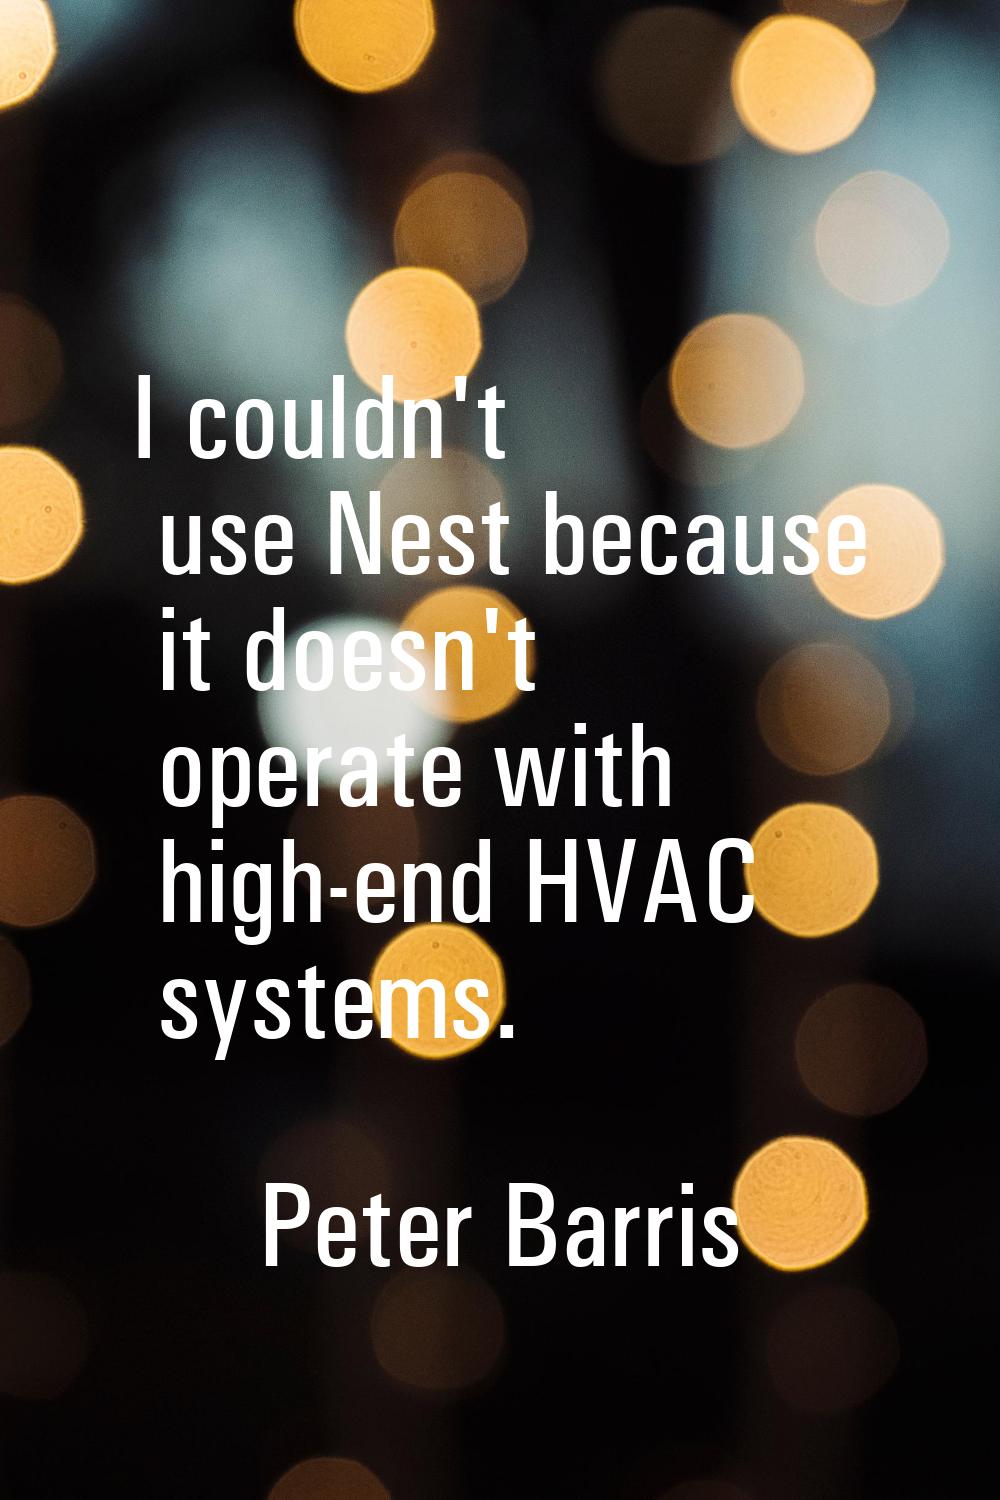 I couldn't use Nest because it doesn't operate with high-end HVAC systems.